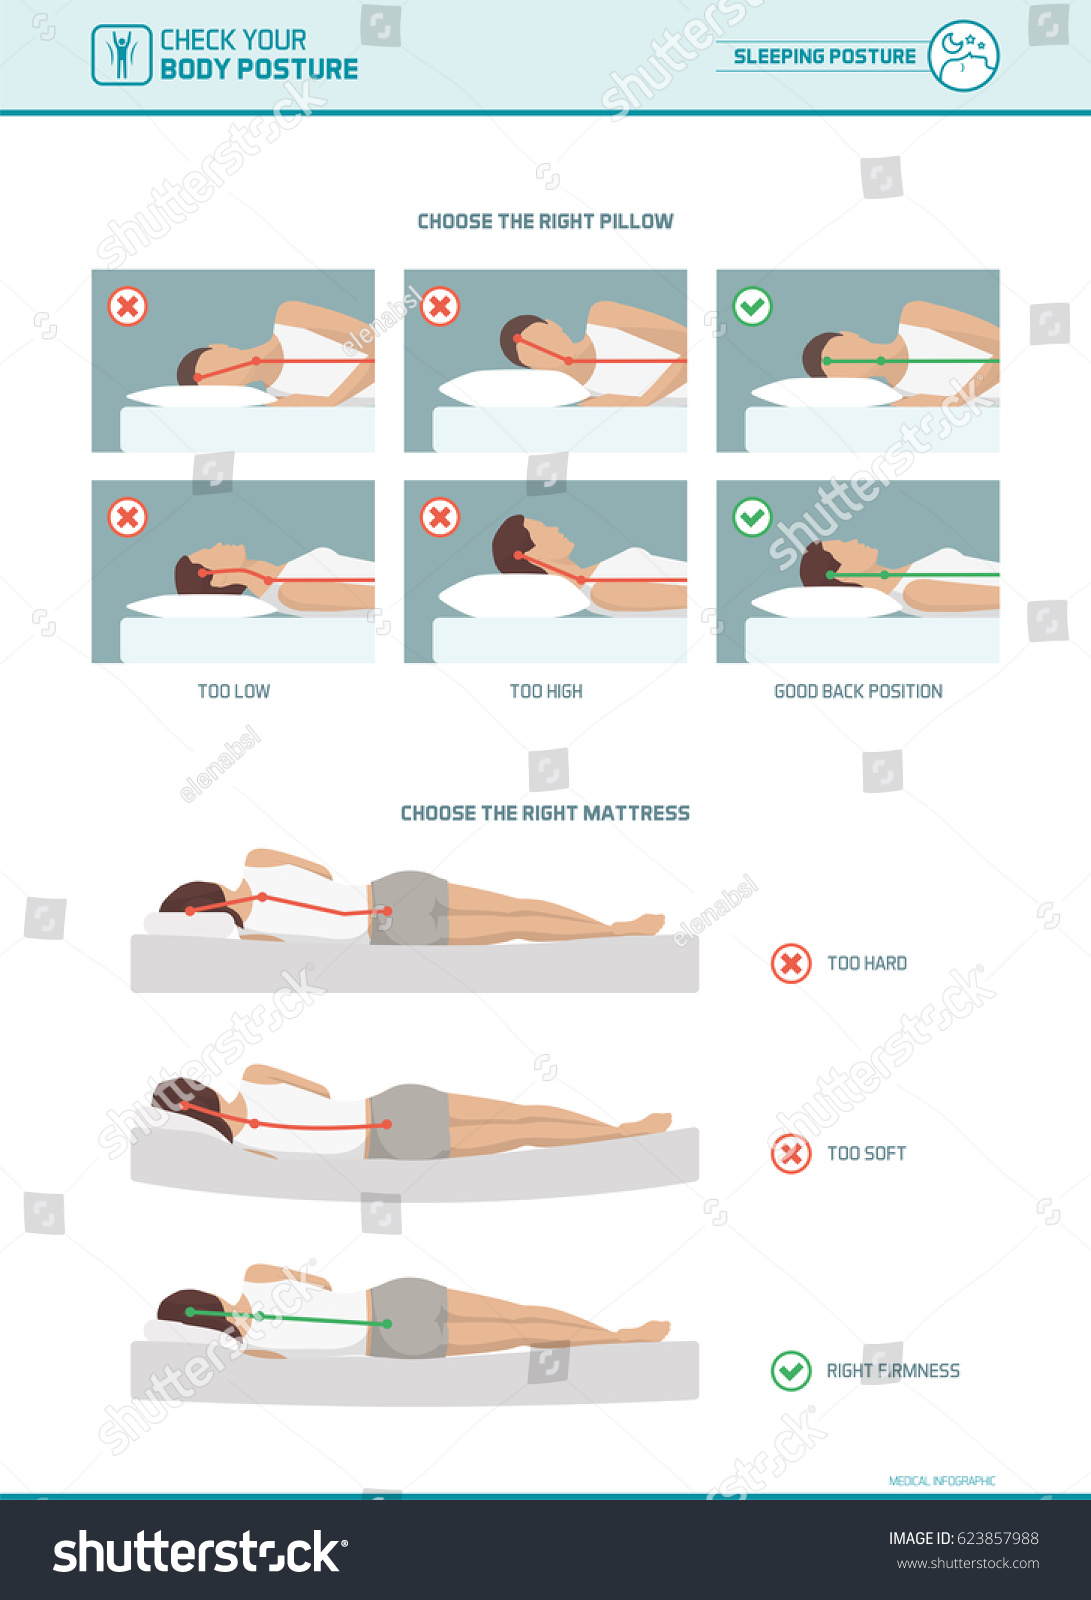 SVG of Correct sleeping ergonomics and body posture, mattress and pillow selection infographic svg